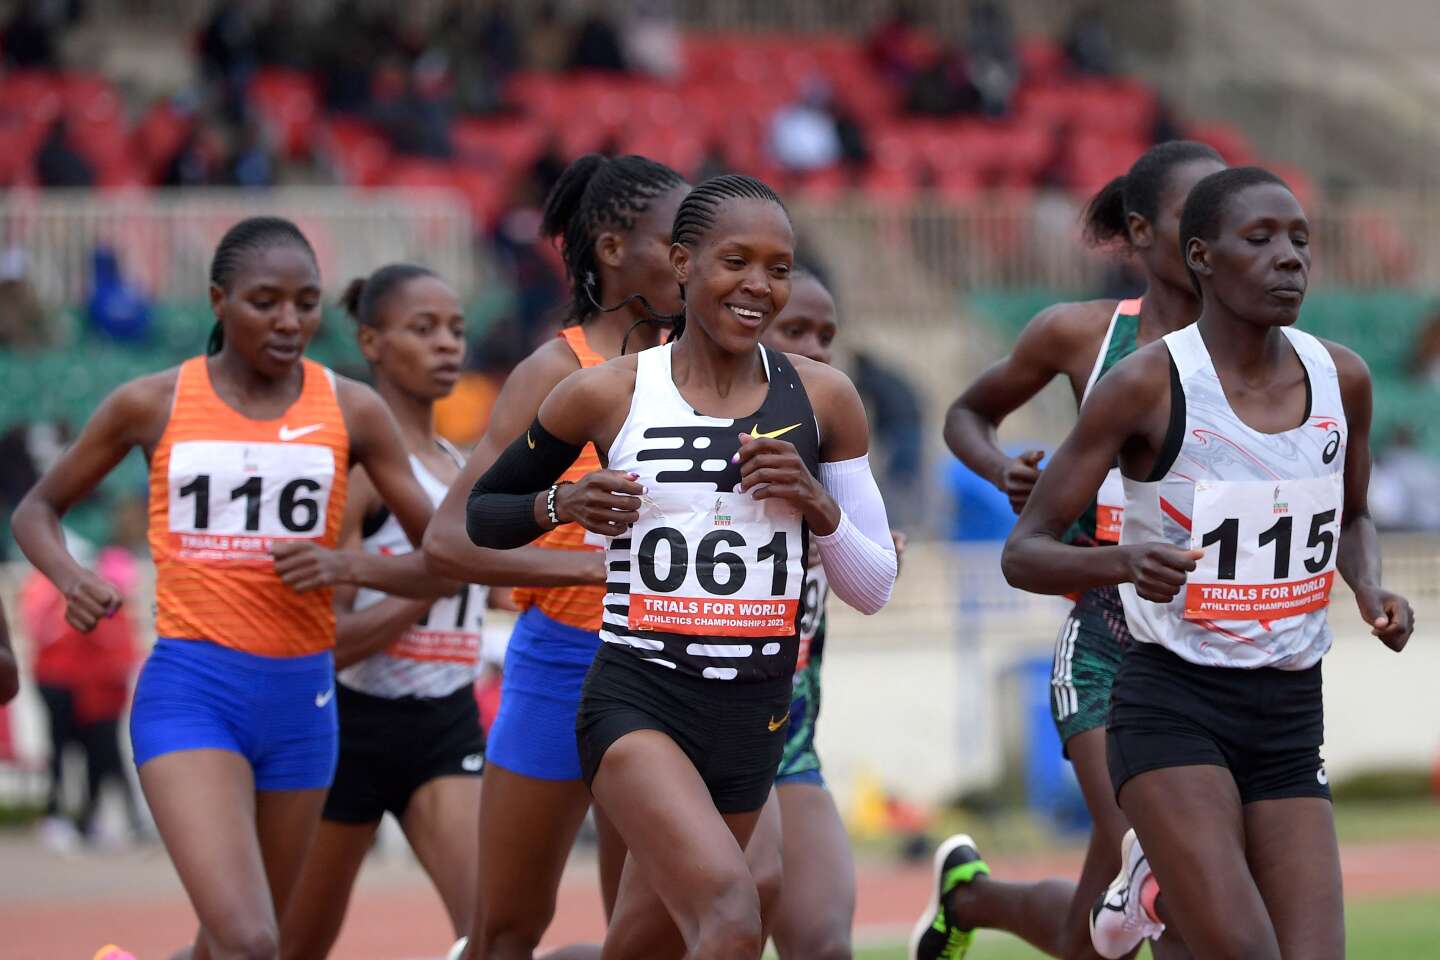 Middle distance queen Faith Kipyegon is eyeing a historic double